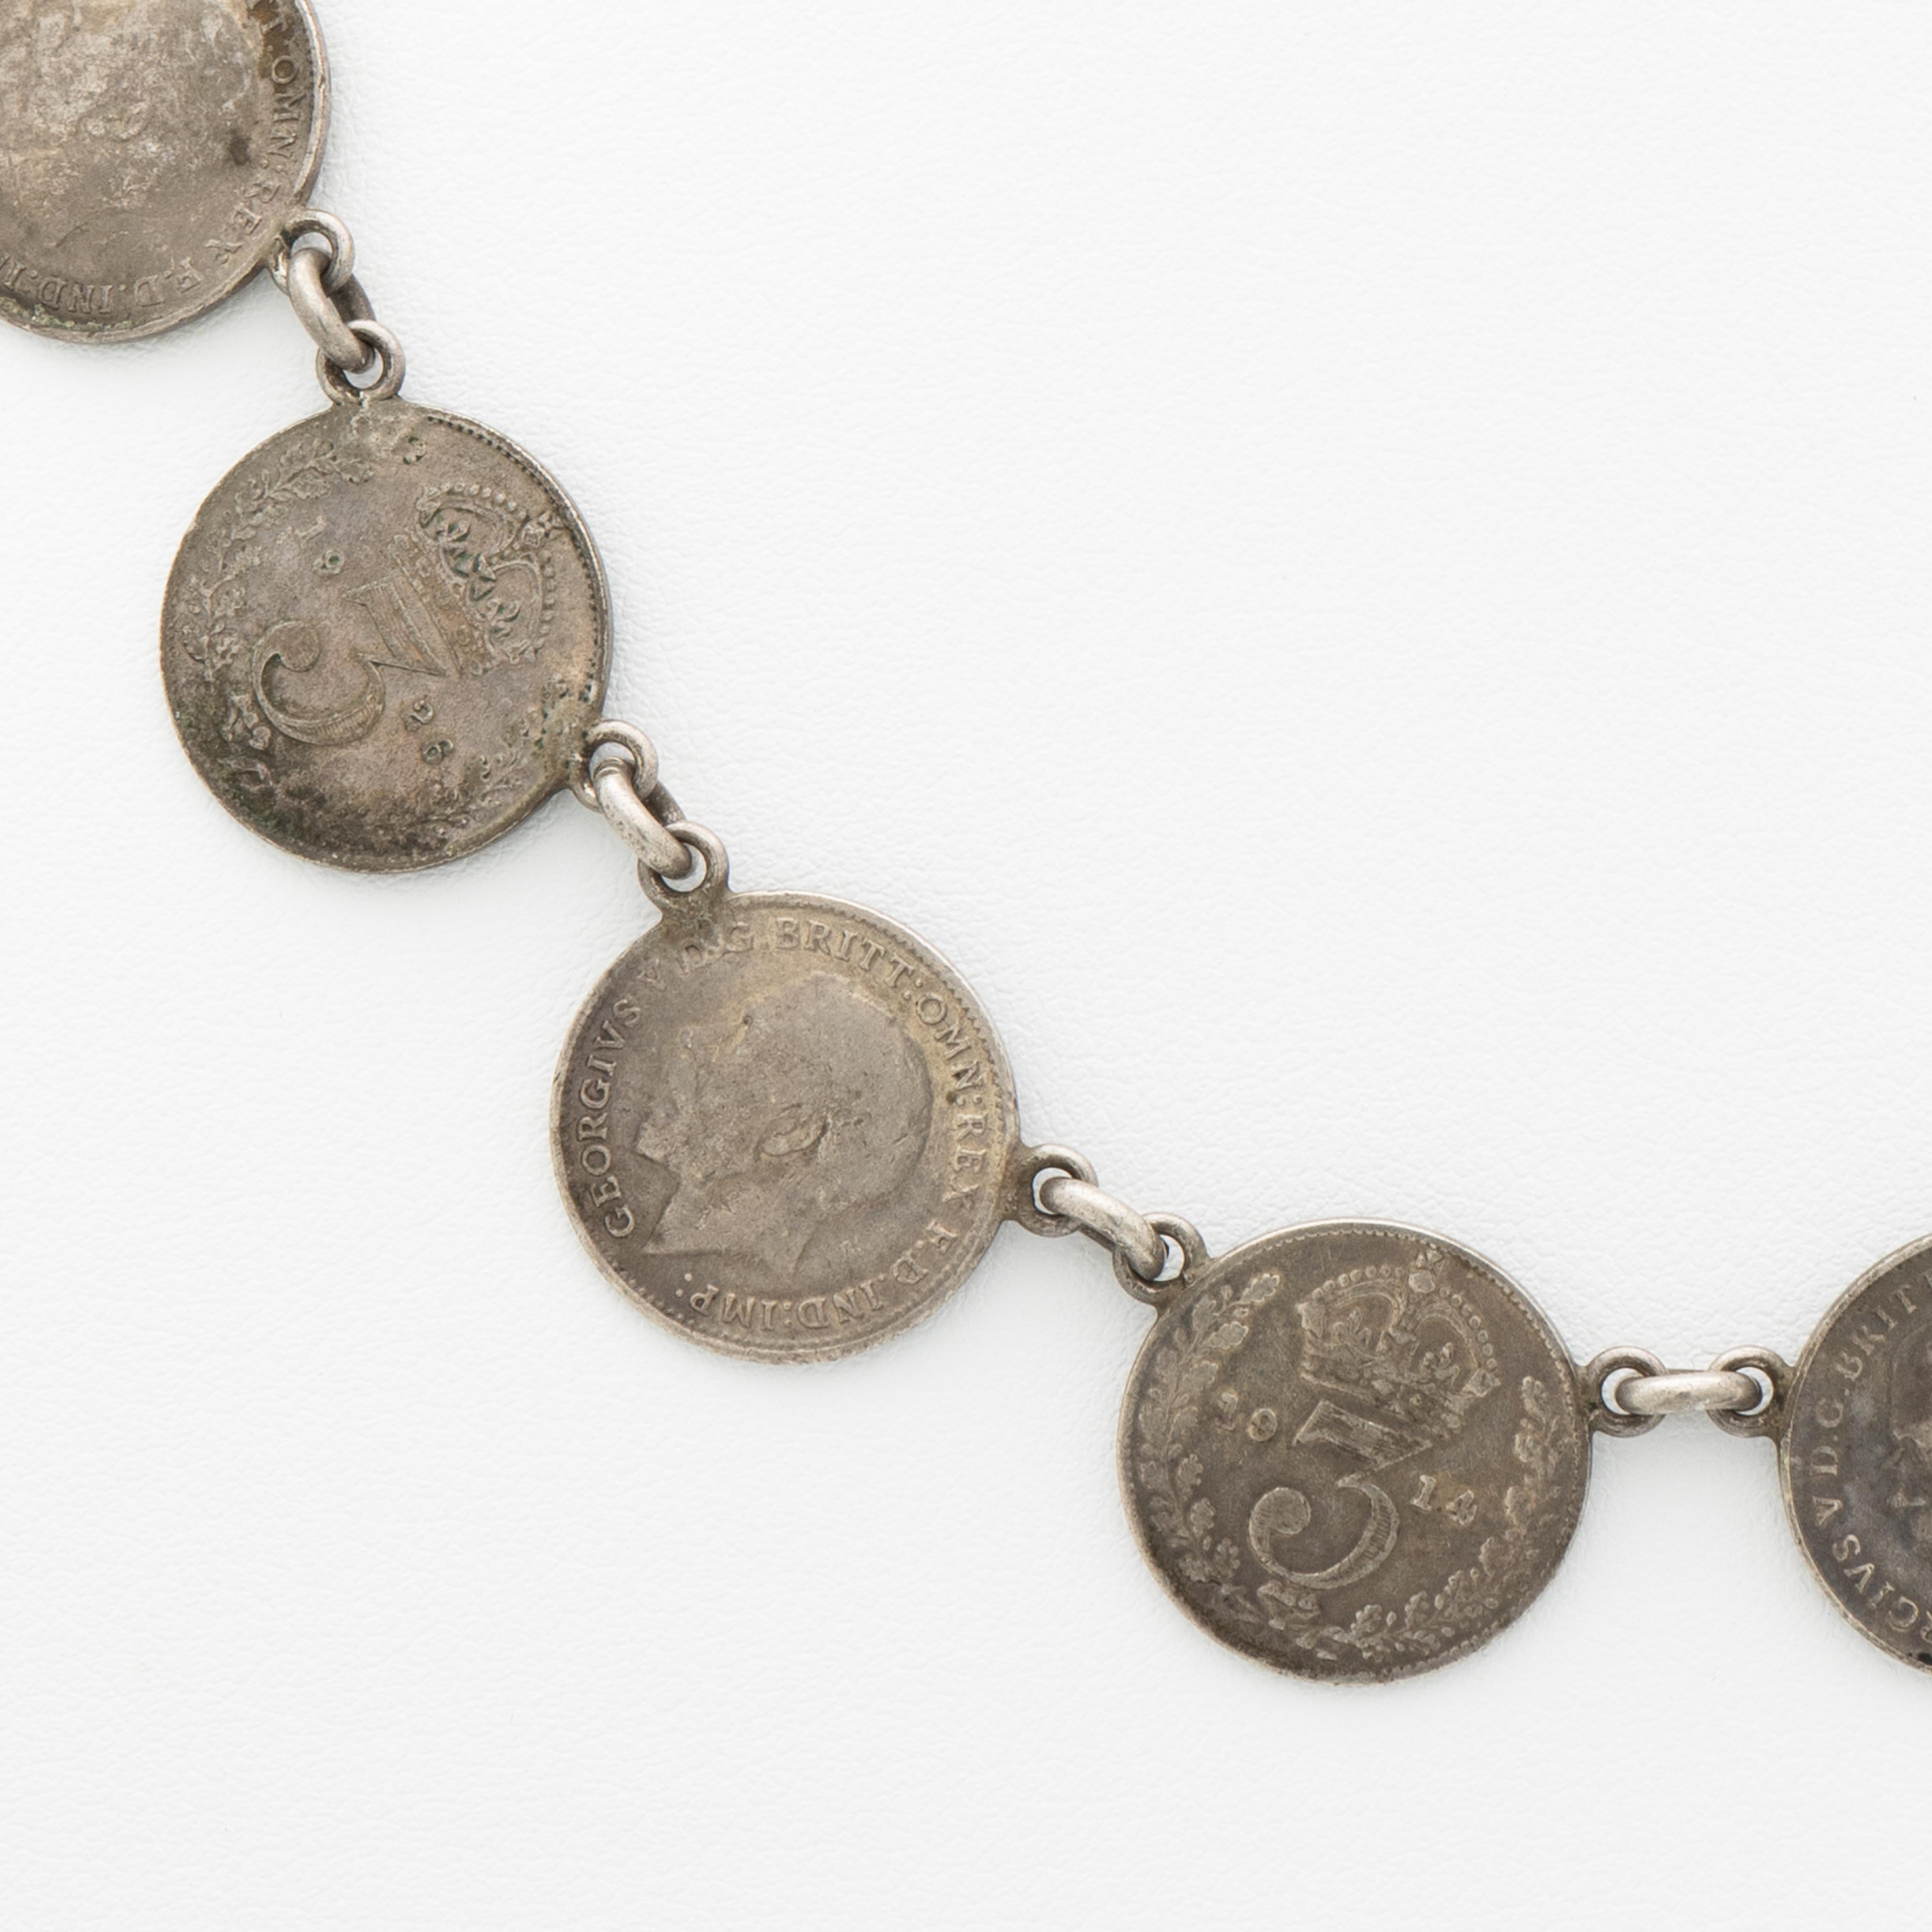 Antique Silver British Pence Coin Rivière c.1919

Length: 42.5cm / 16.73 in.
Width: 16.2mm / 0.64 in.
Weight: 32.68 grams

This antique silver necklace is unpolished and is oxidized but upon request we are happy to polish it for you.